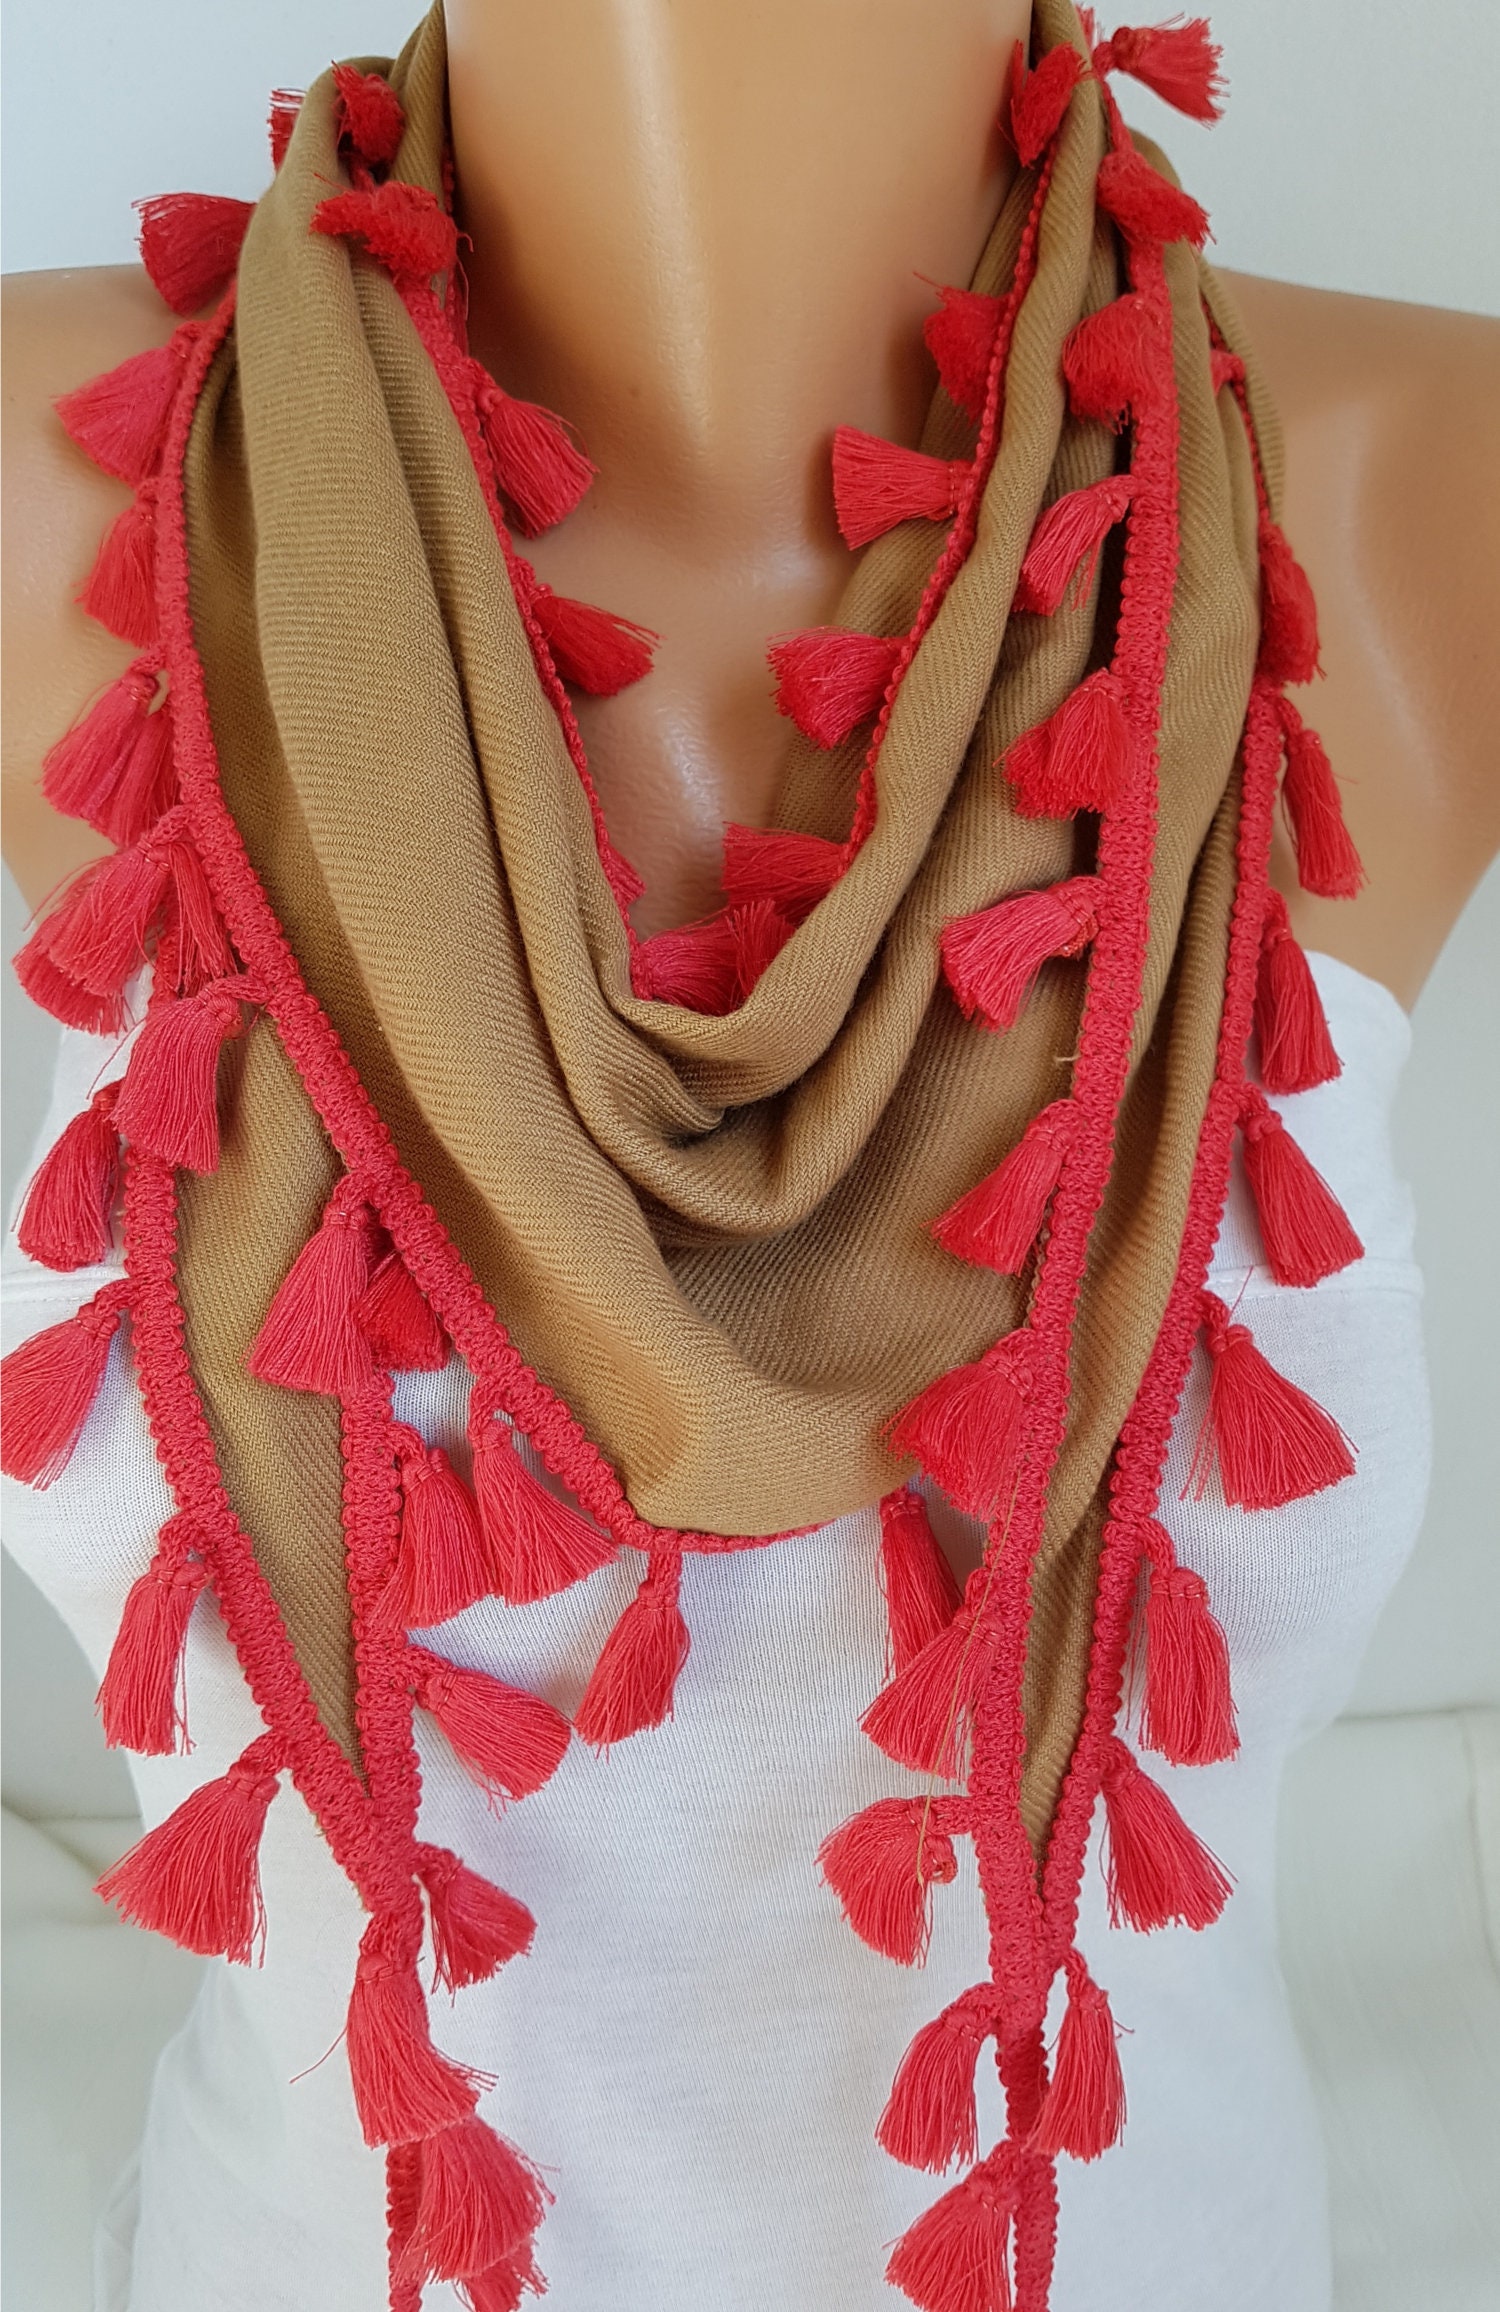 Bohemian Accessories For Women  gift for her mothers day gift for mom Boho Tassel Scarf Women Hippie Chic Winter Scarves For Women Gift